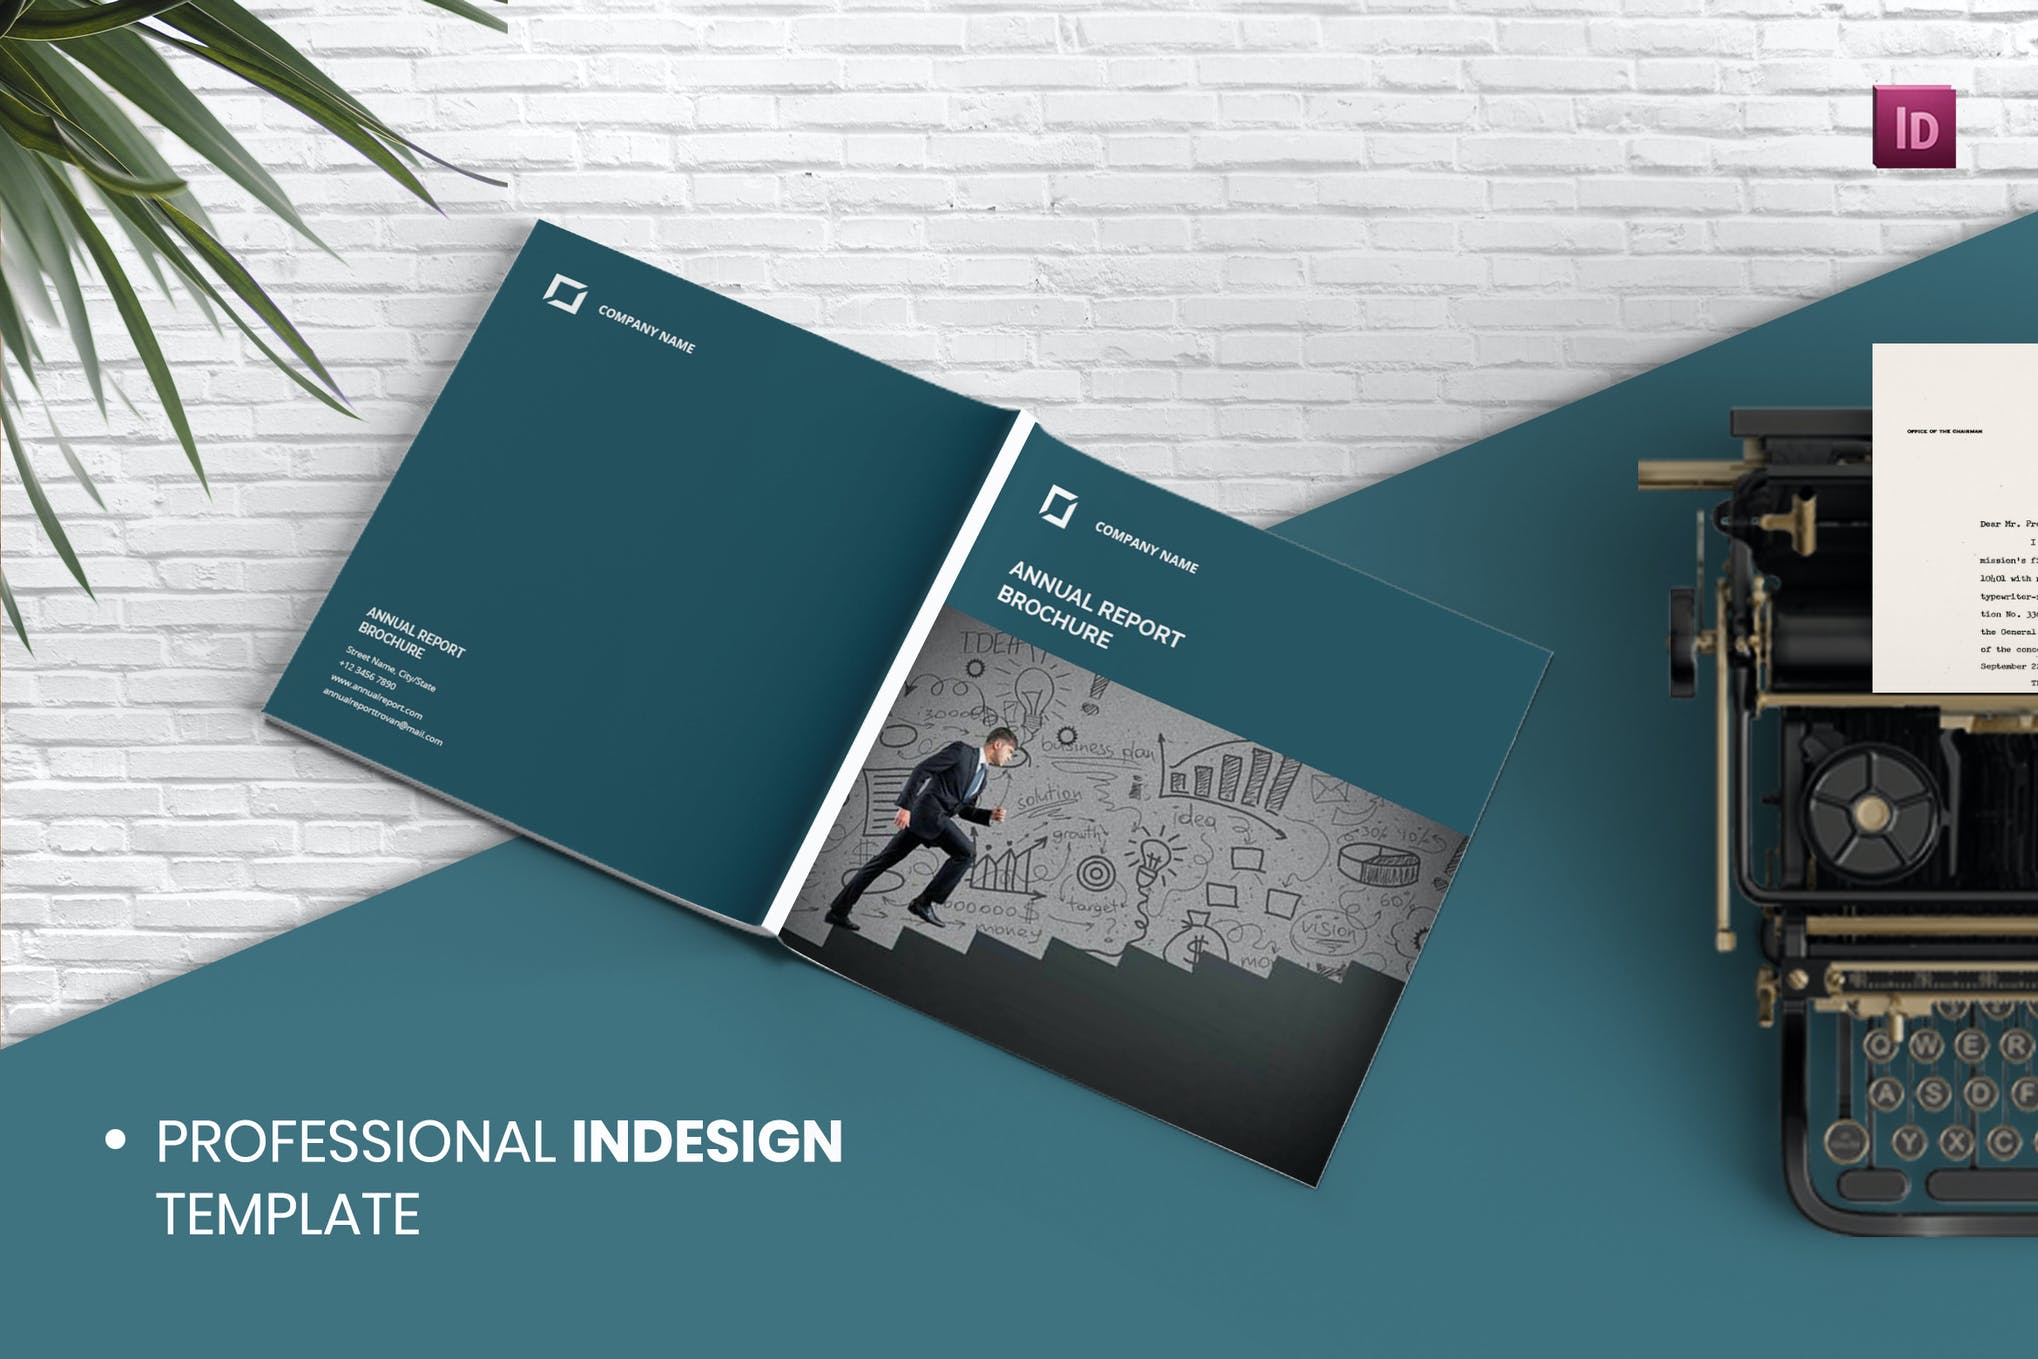 21+ Best Non Profit Annual Report Templates for Charities - Theme Inside Non Profit Annual Report Template